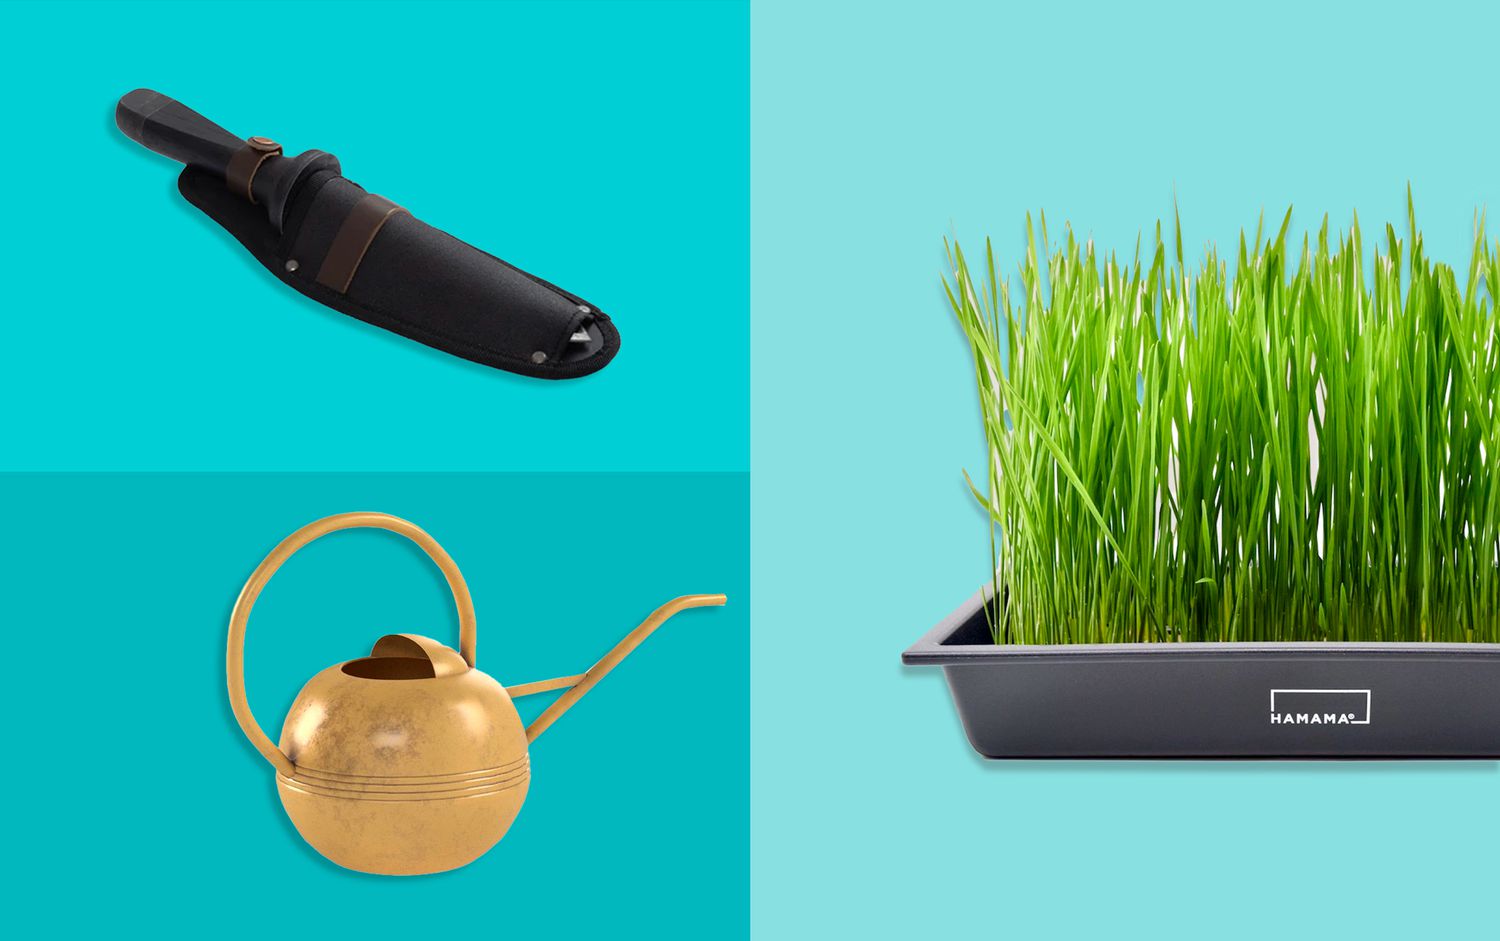 watering can, gardening knife and wheatgrass on turquoise background